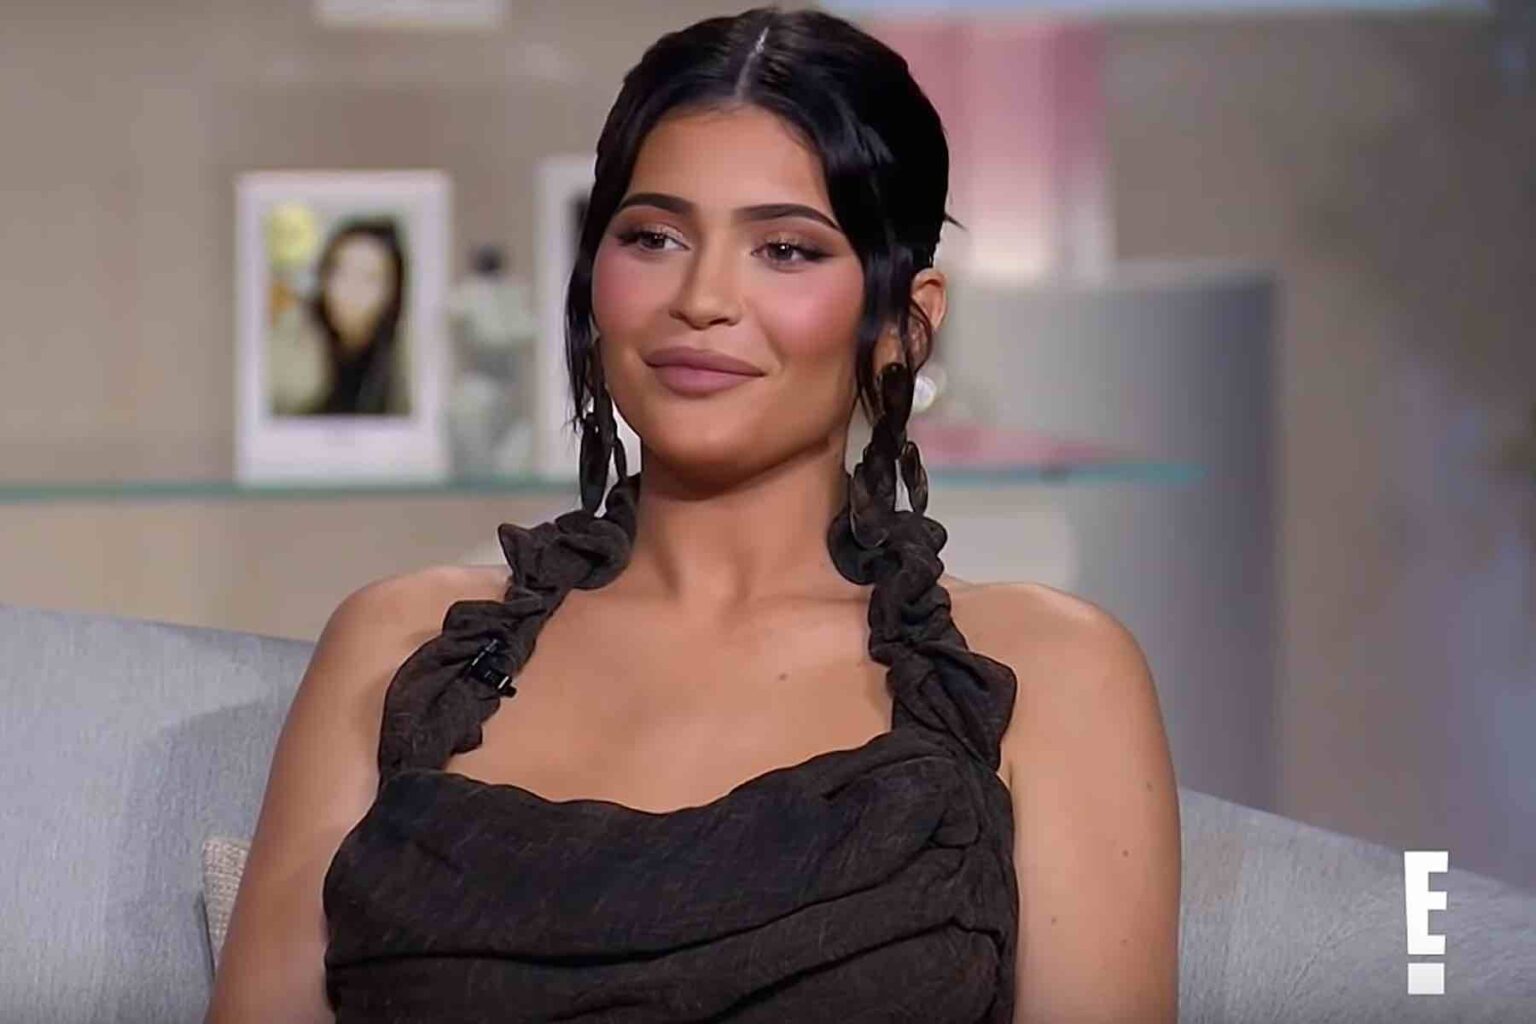 Kylie Jenner discusses her decision to get plastic surgery on the 'Keeping Up with the Kardashians' reunion special. Learn why she wanted bigger lips.